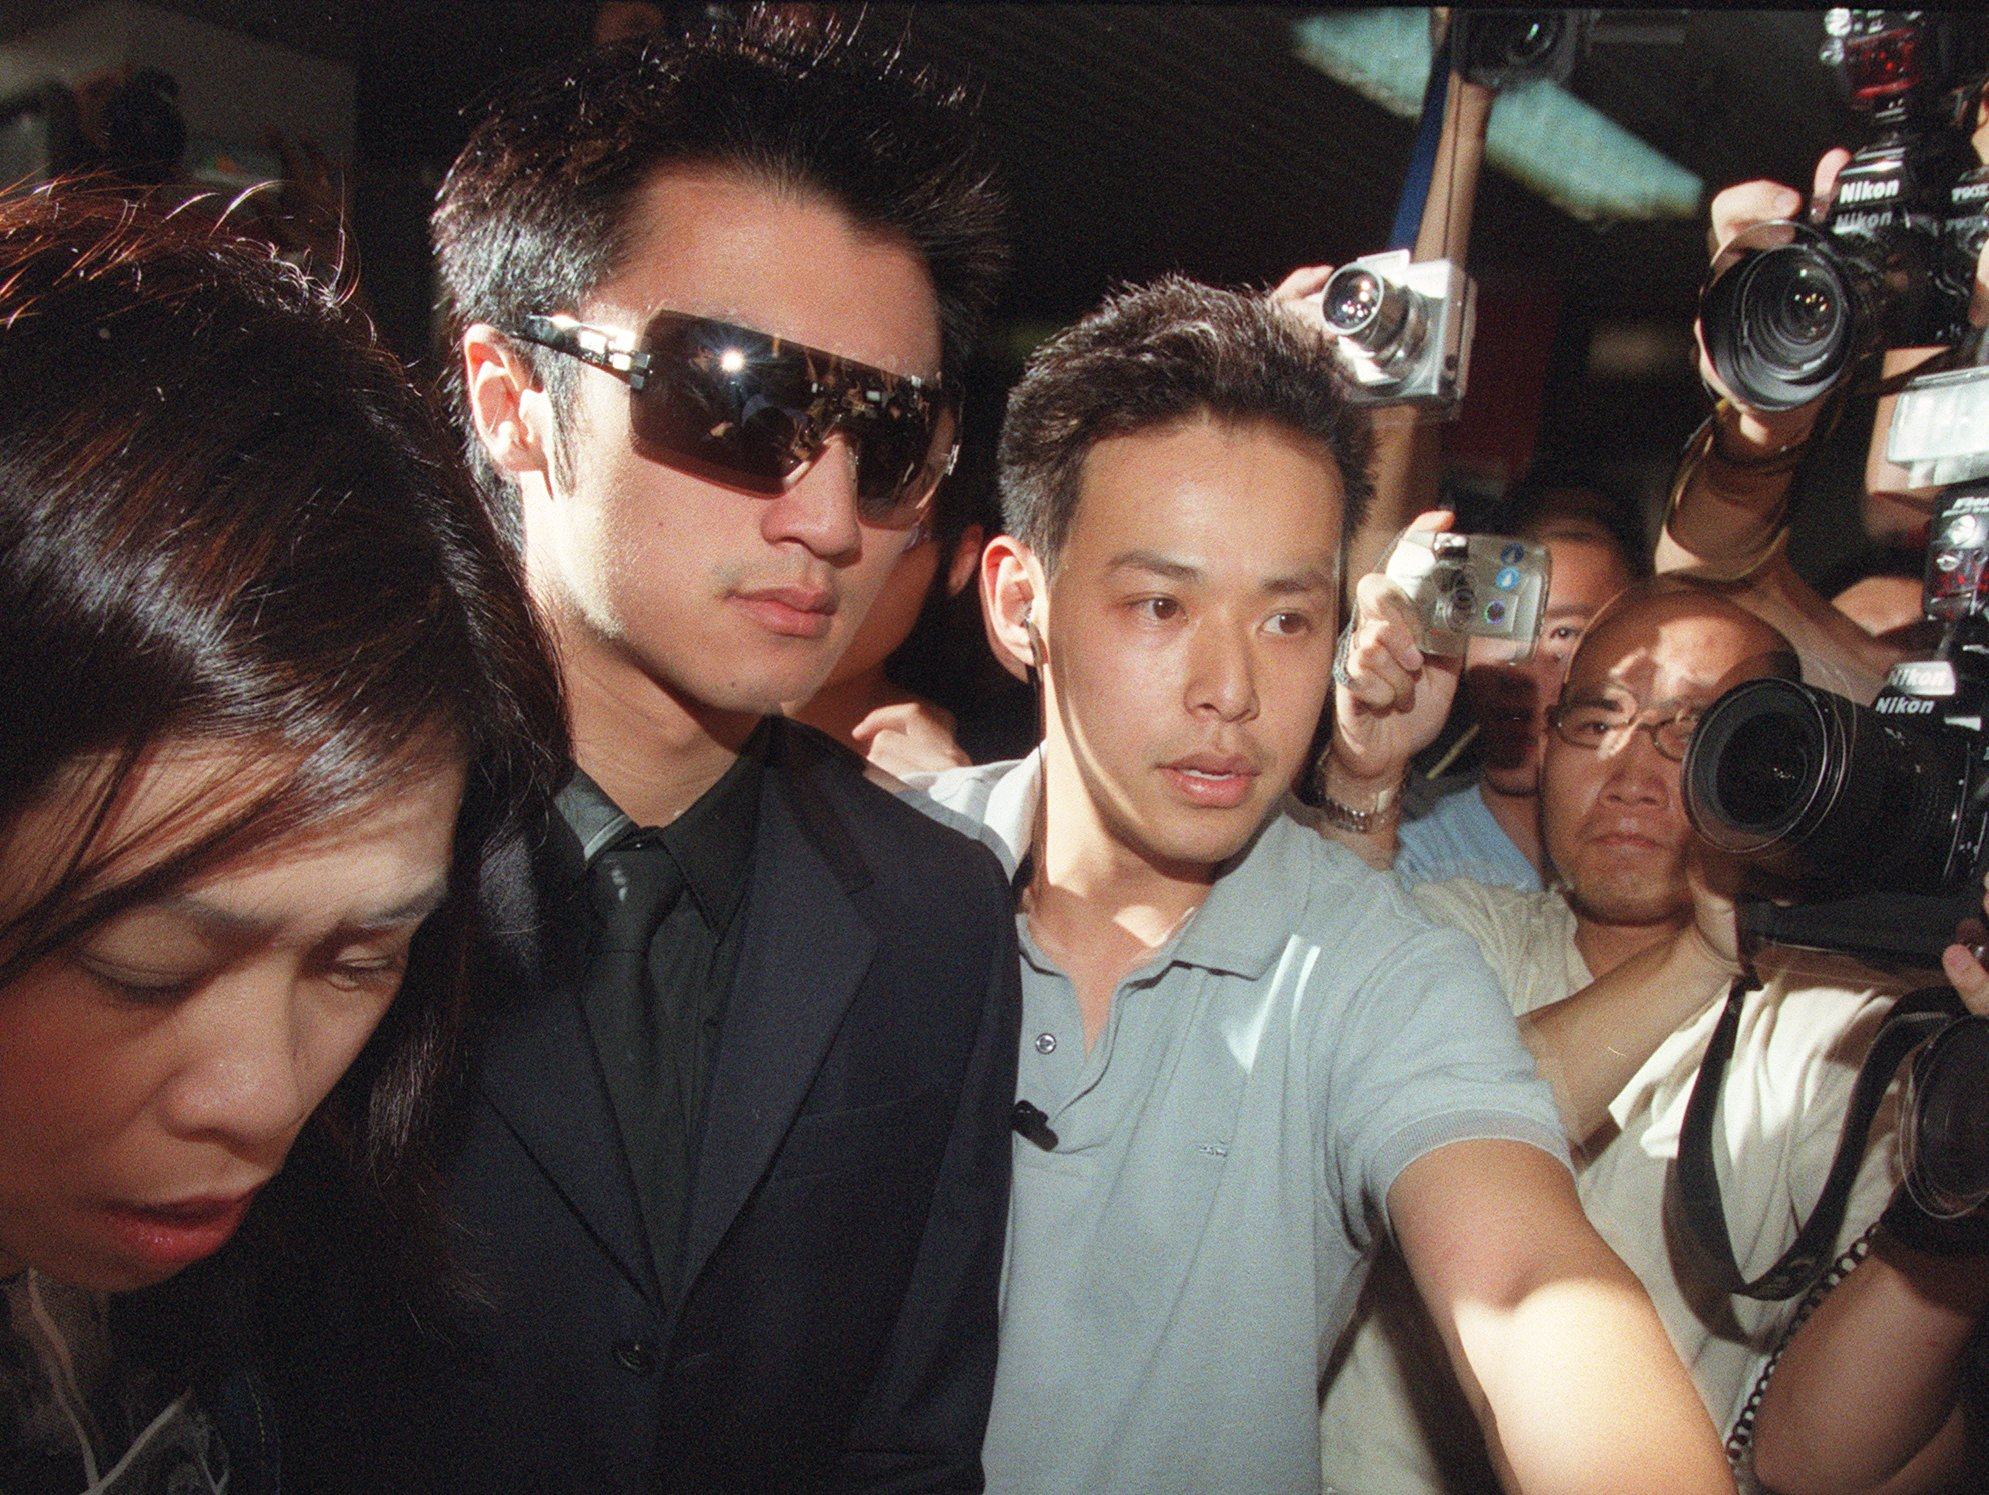 Canto-pop star Nicholas Tse arrives at the Independent Commission Against Corruption headquarters in Central in June 2002, where he was charged with conspiracy to pervert the course of justice. Photo: SCMP 